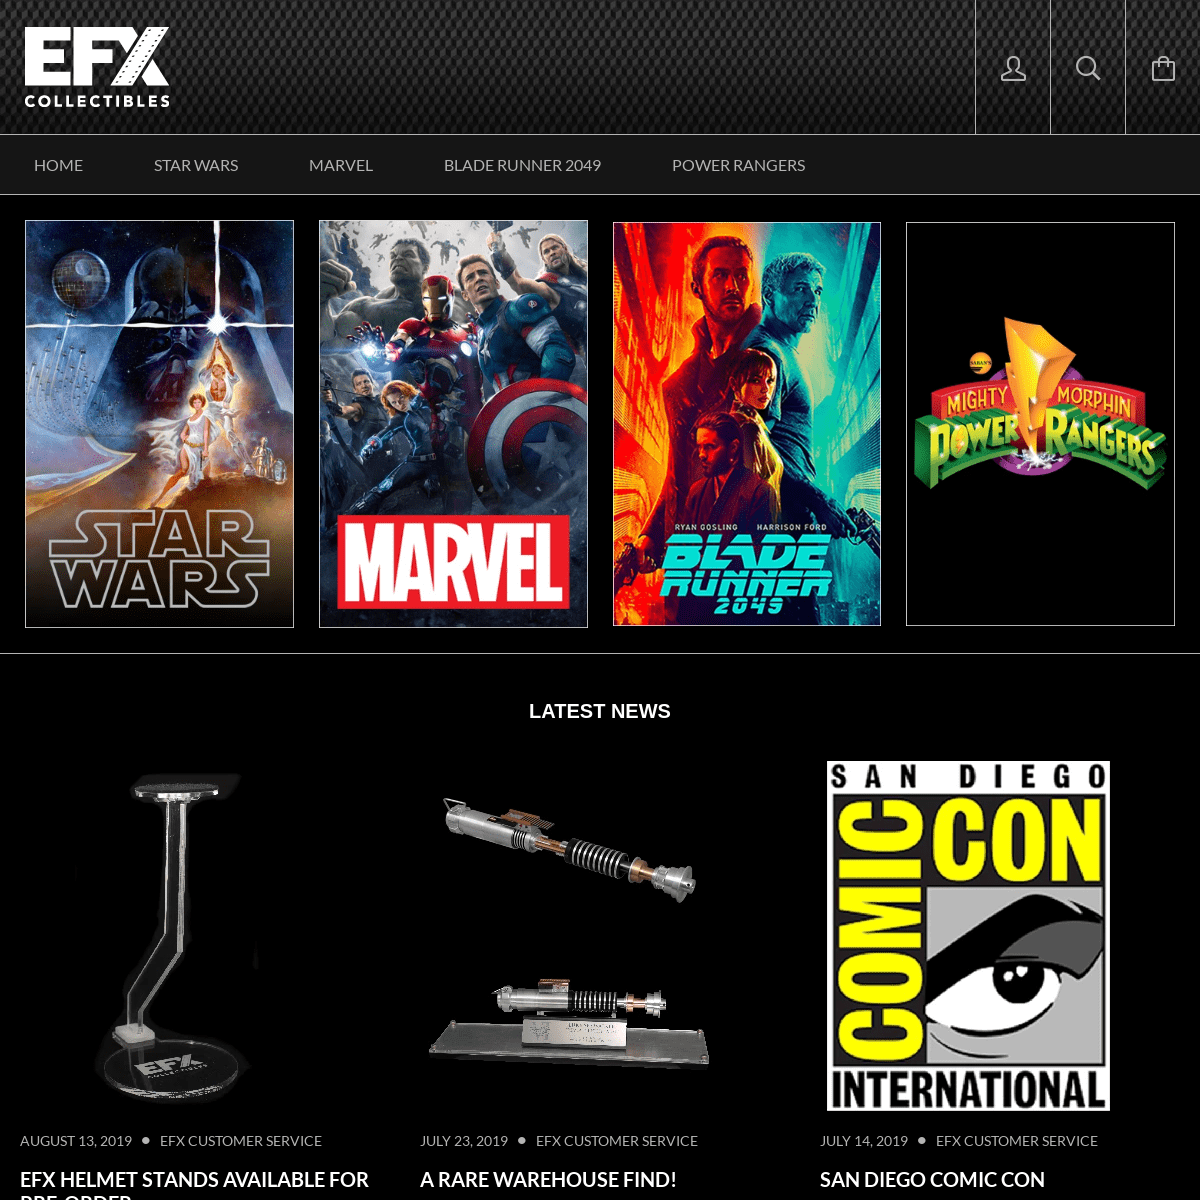 A complete backup of efxcollectibles.com